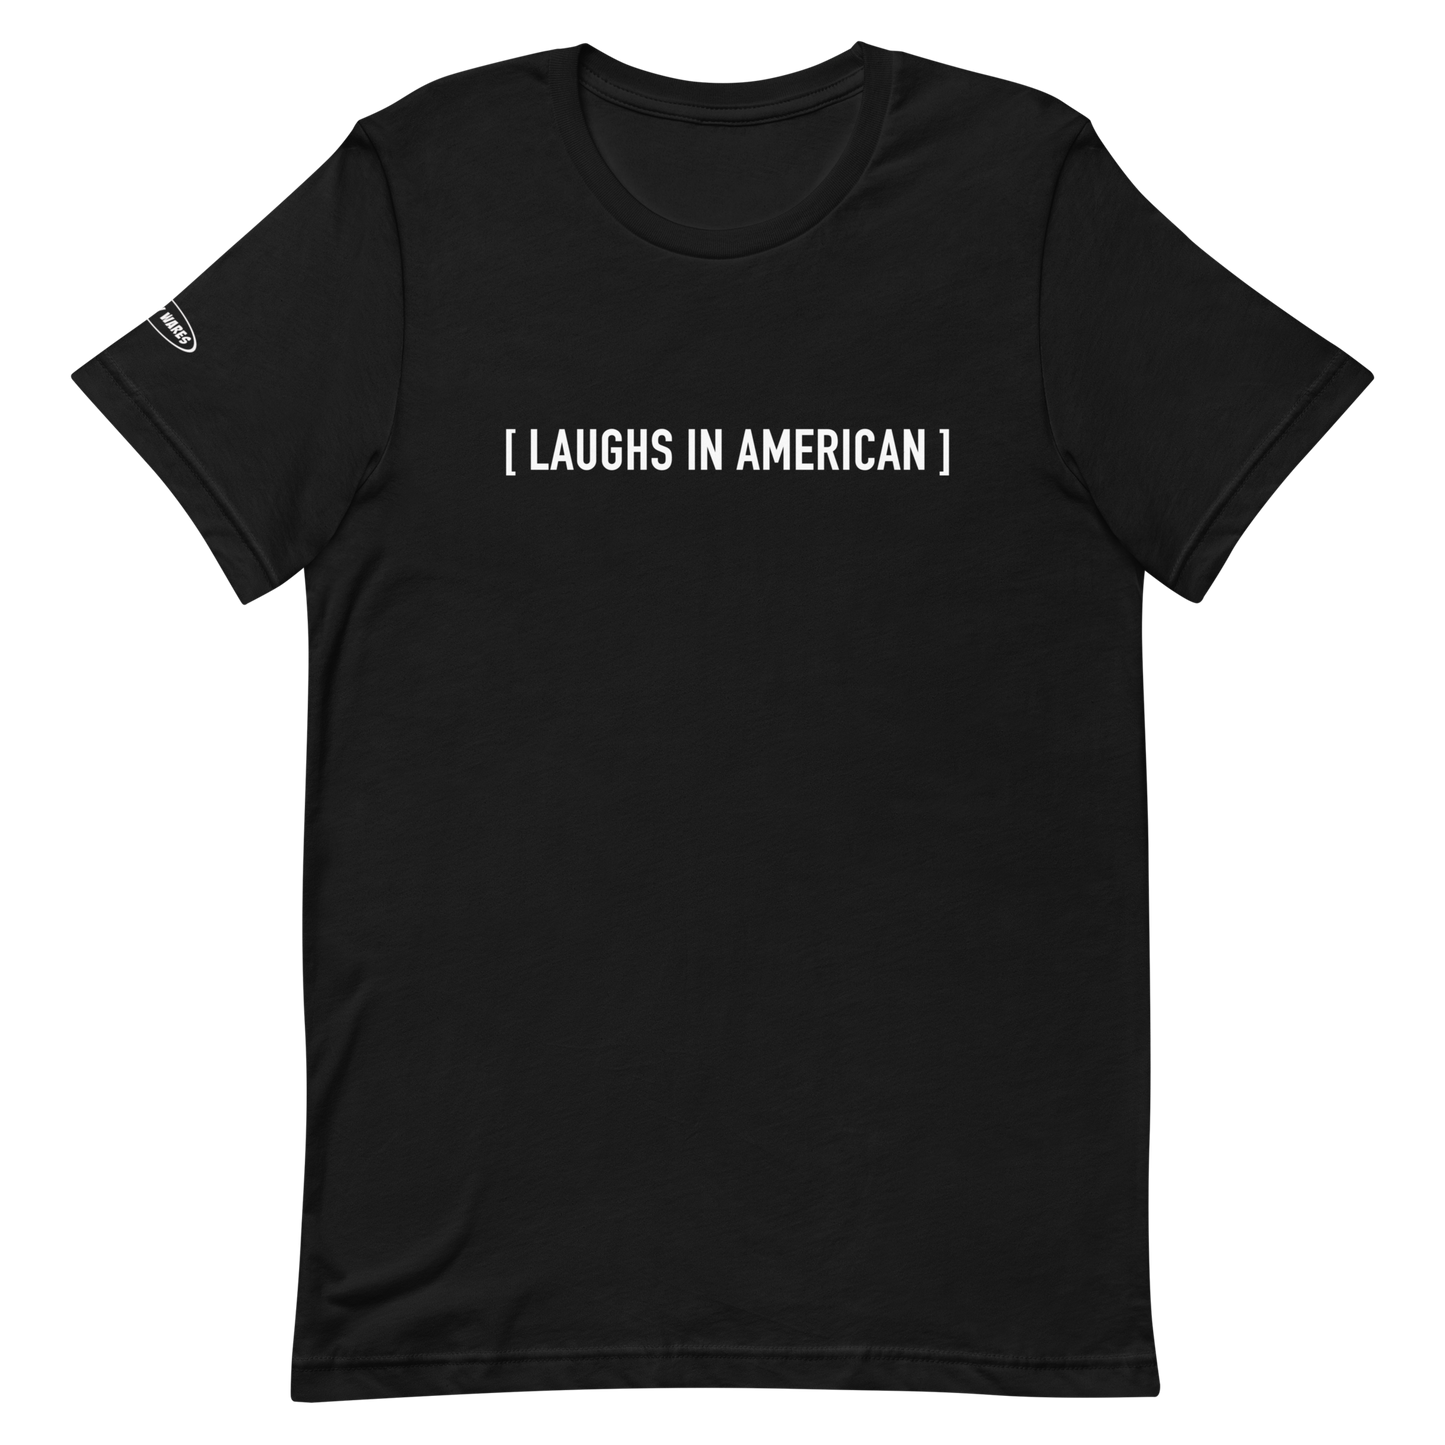 SUBTITLE - [laughs in american] - Funny T-Shirt